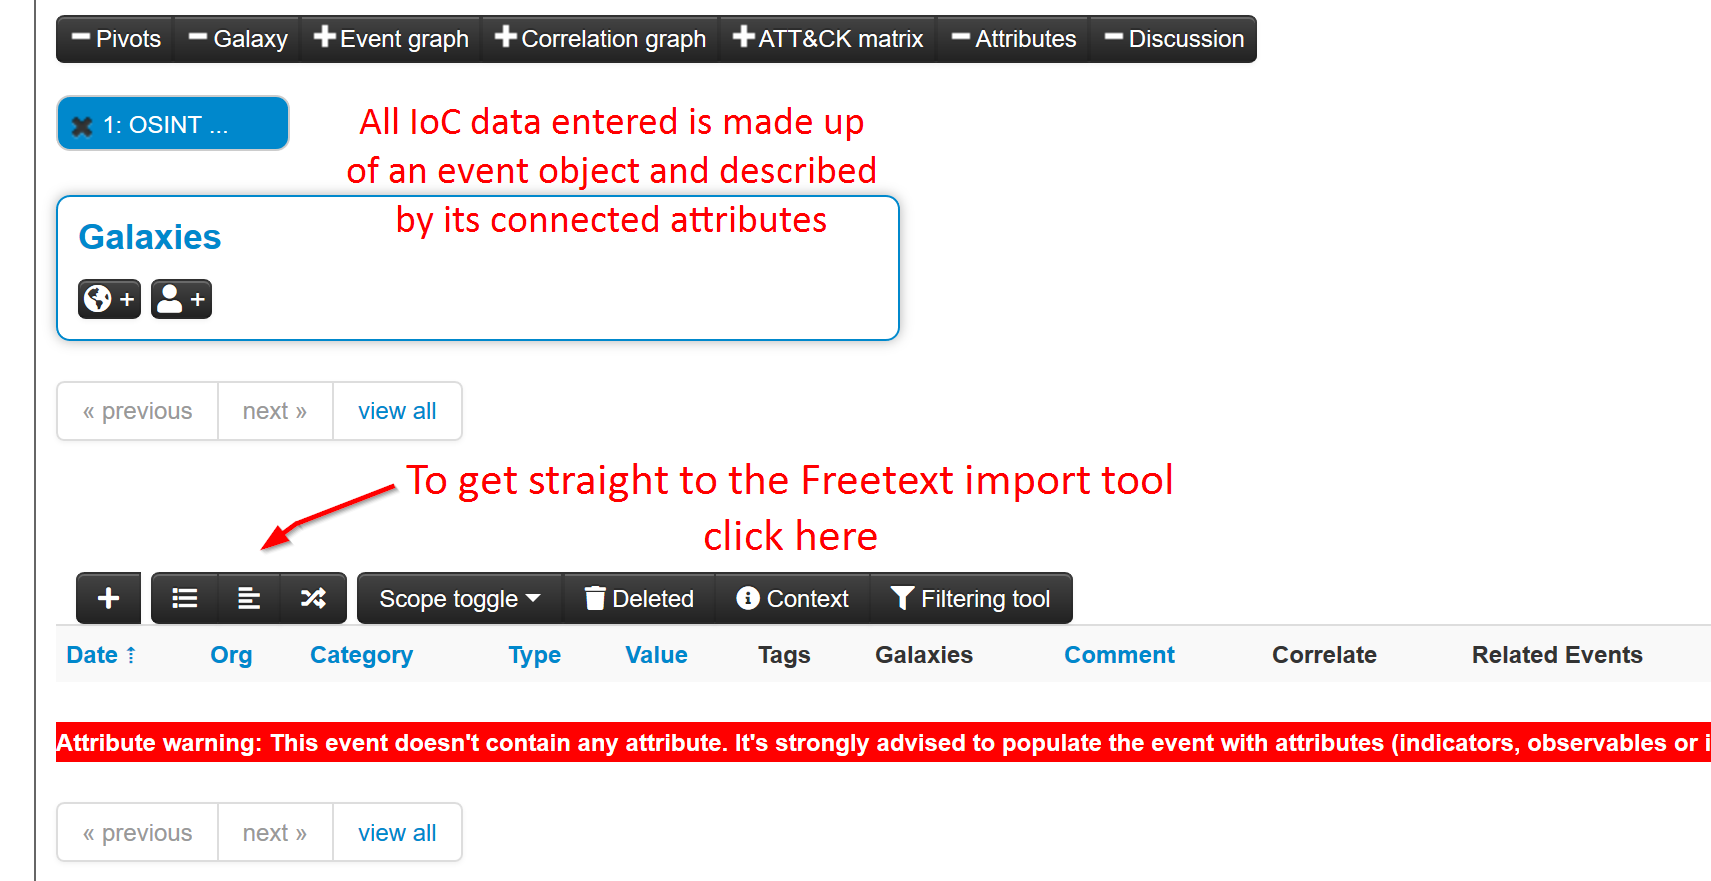 Use Freetext import